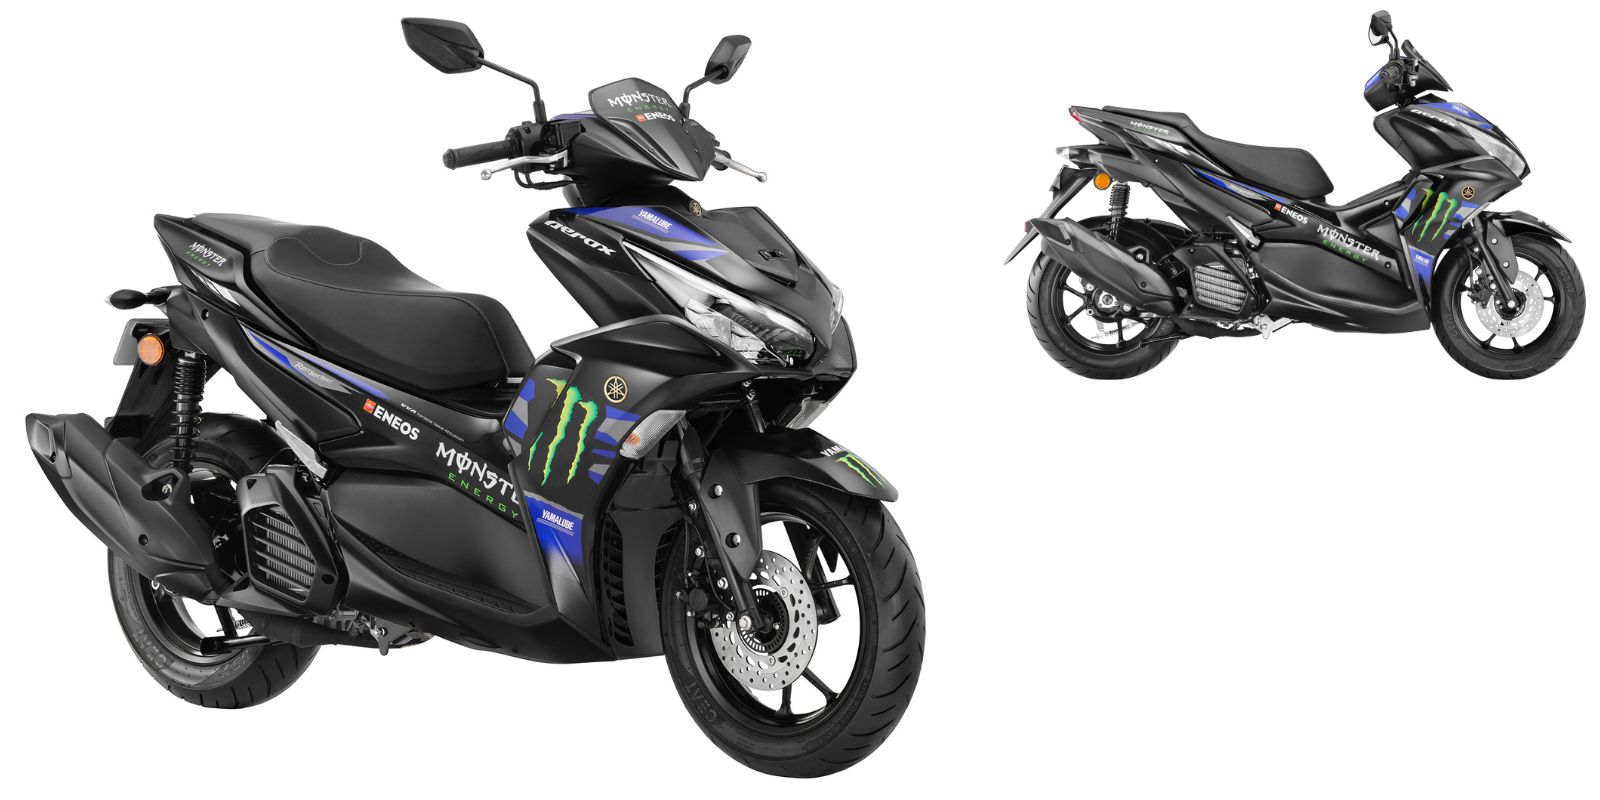 Yamaha Aerox 155 On Road Price In Delhi: Yamaha Aerox 155 MotoGP Edition  launched in India at INR 1.48 lakh, ET Auto